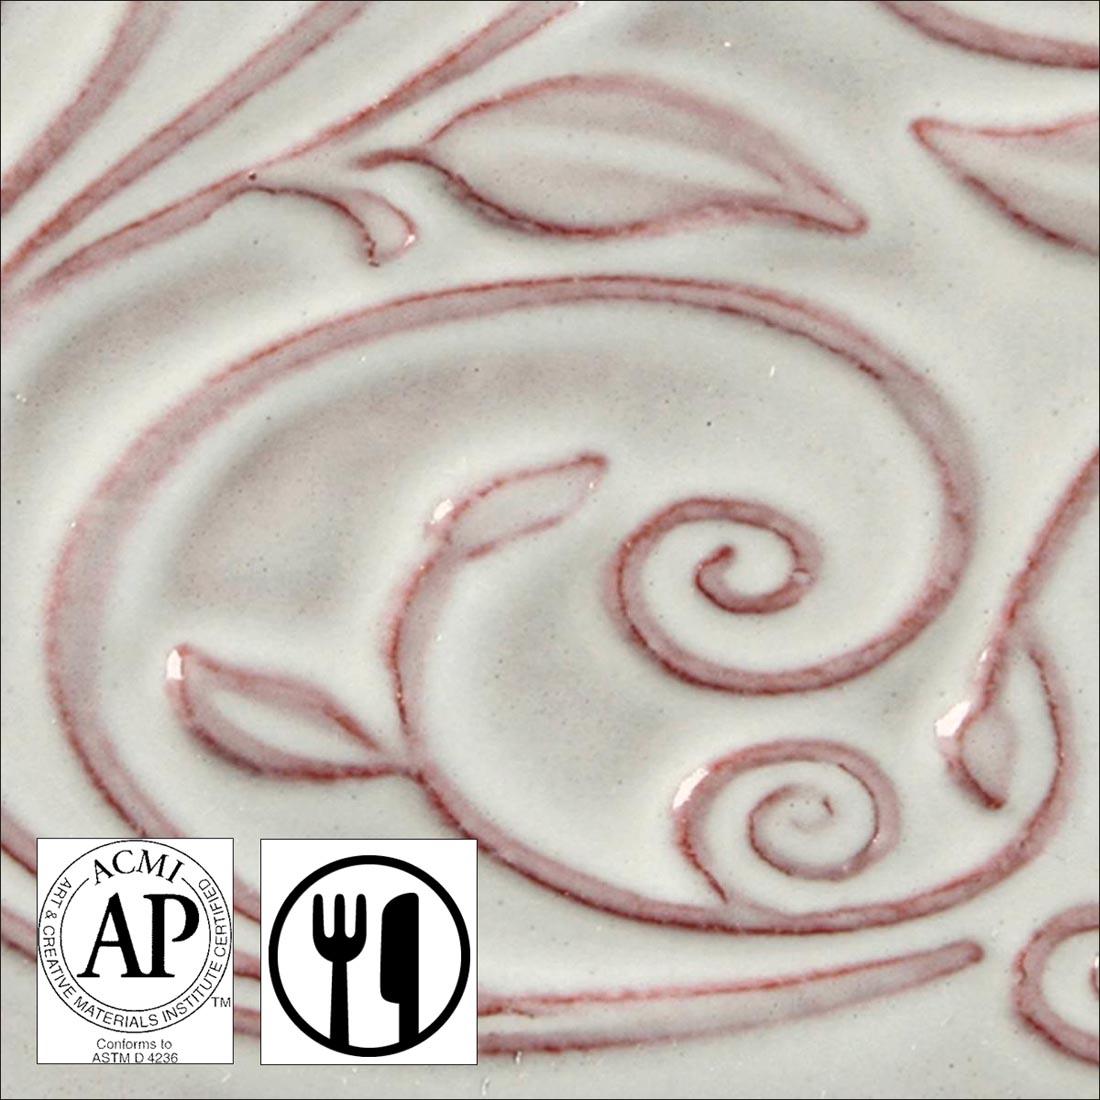 clay tile with White Clover AMACO Opalescent Glaze applied; symbols for AP Seal and food safe